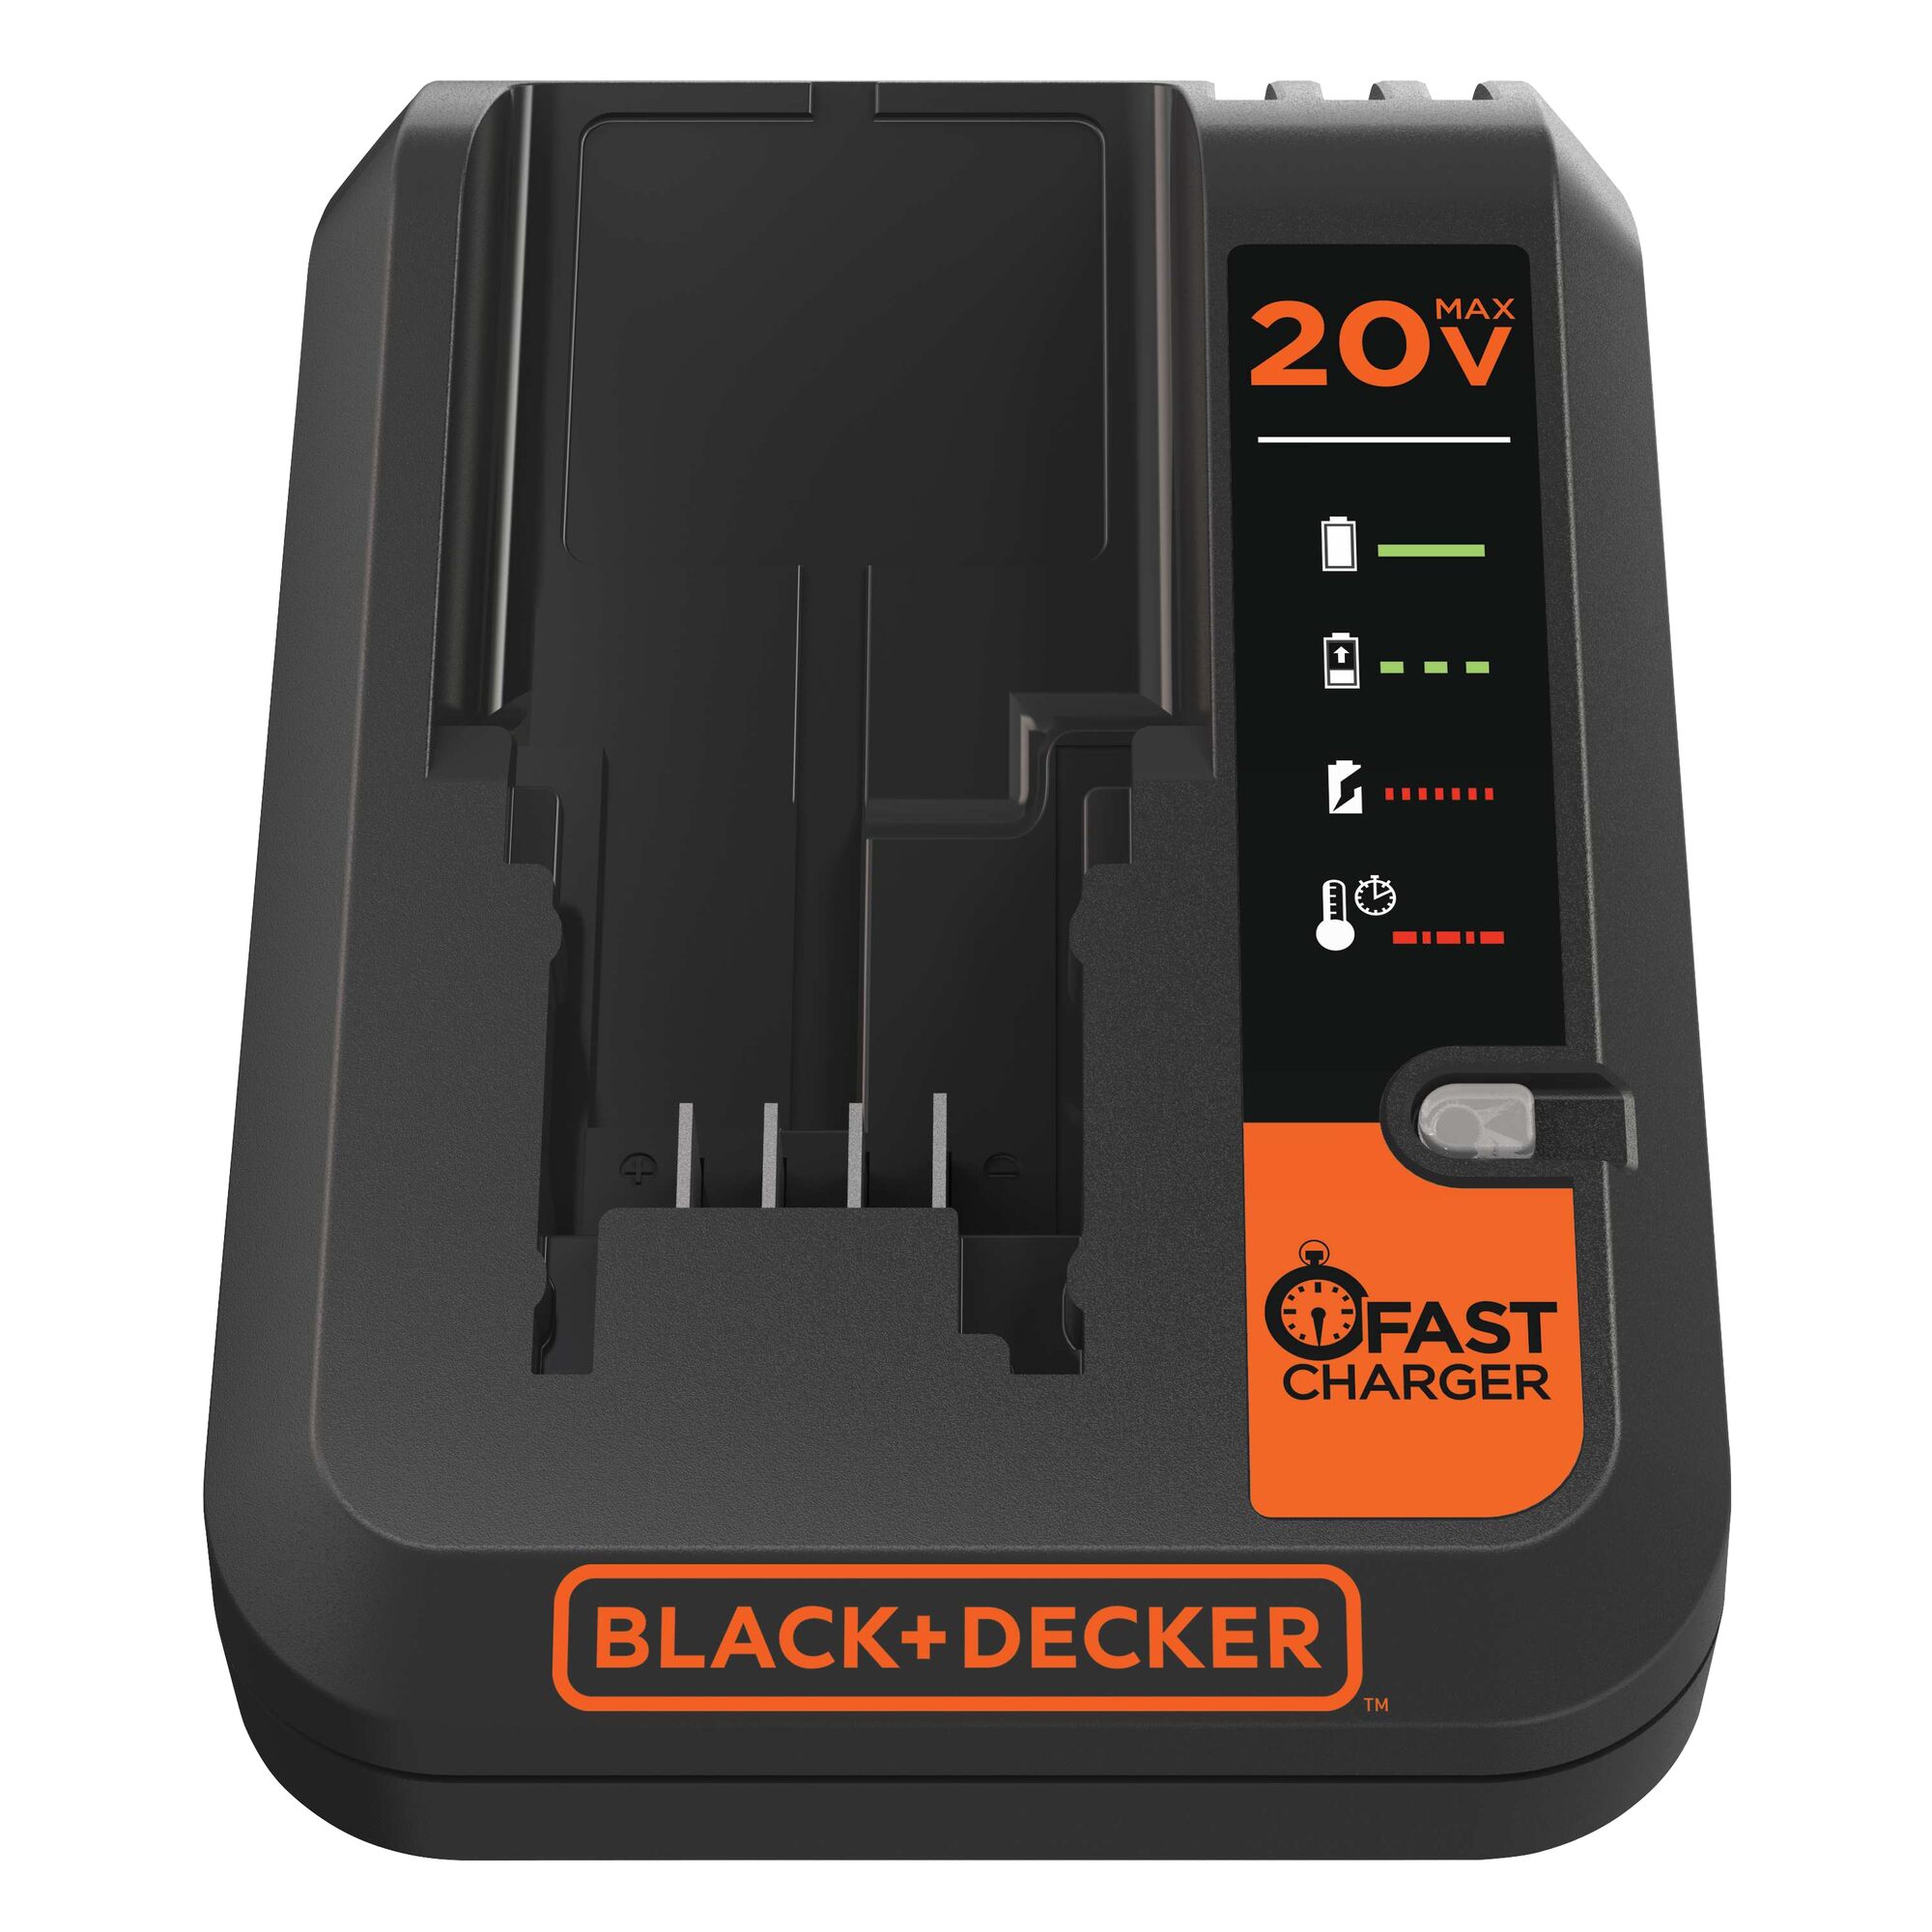 Profile of black and decker 12c to 20 volt lithium fast charger.